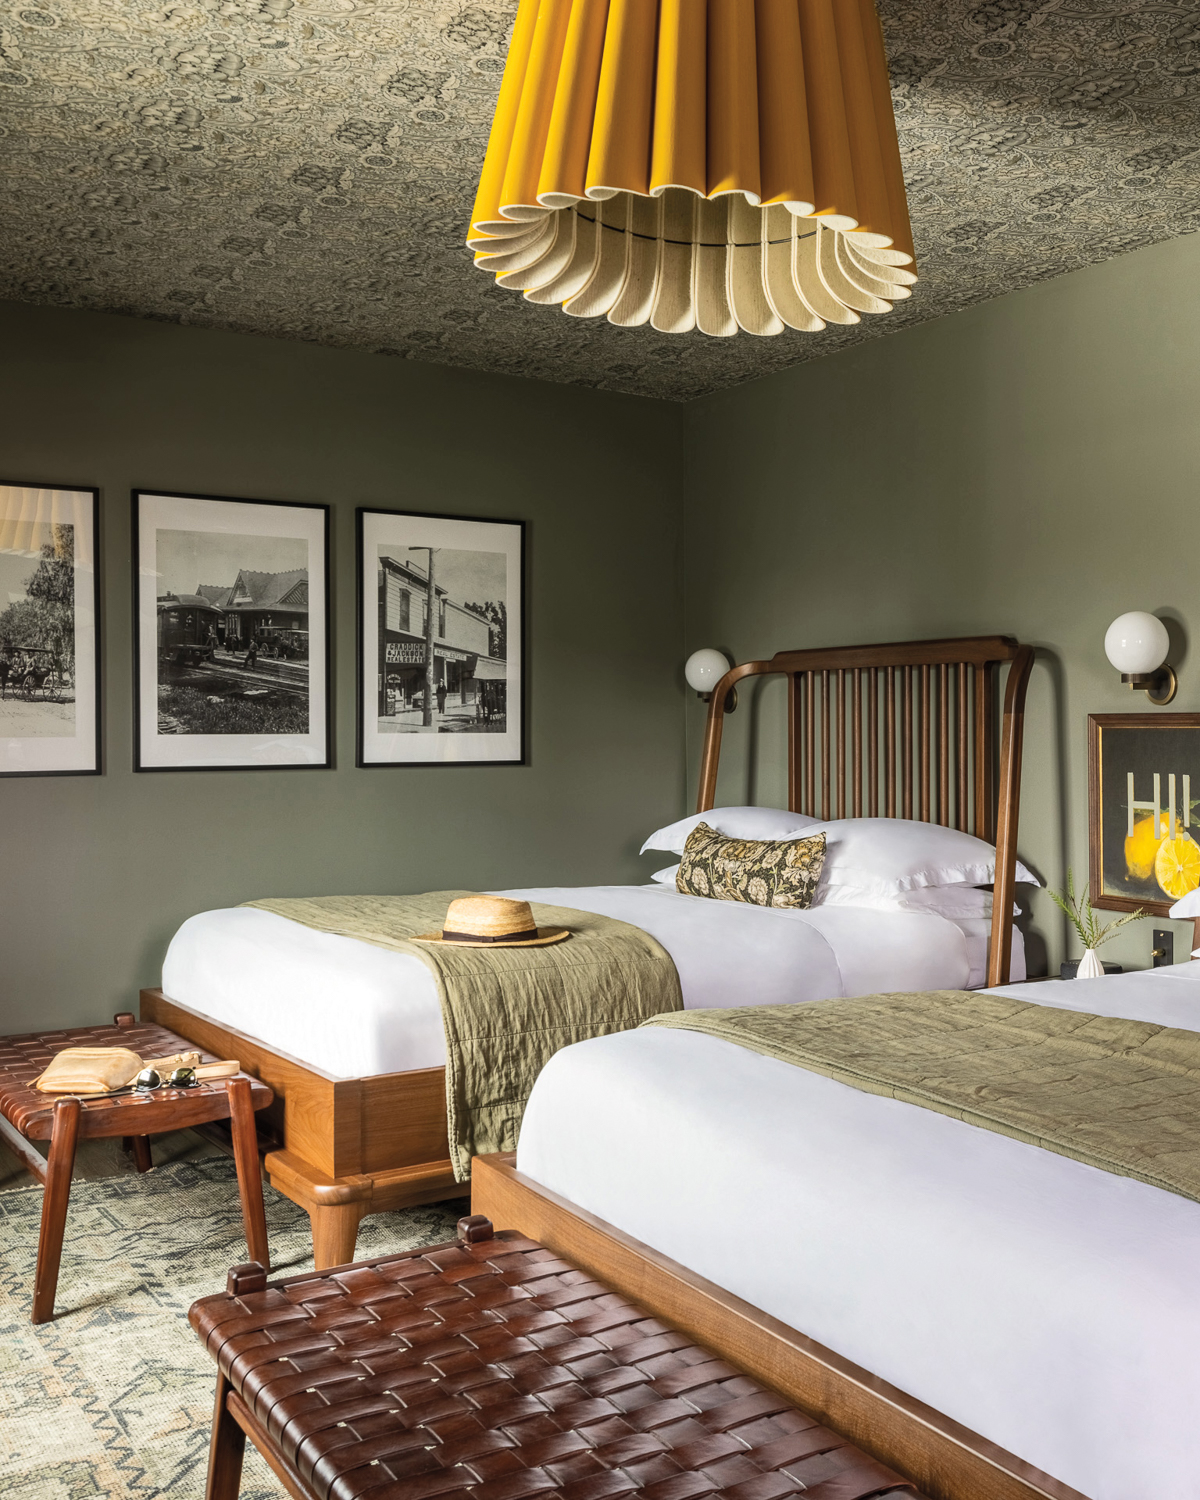 Twin beds in the Richland hotel room with sage-colored walls and a large, pleated yellow pendant light